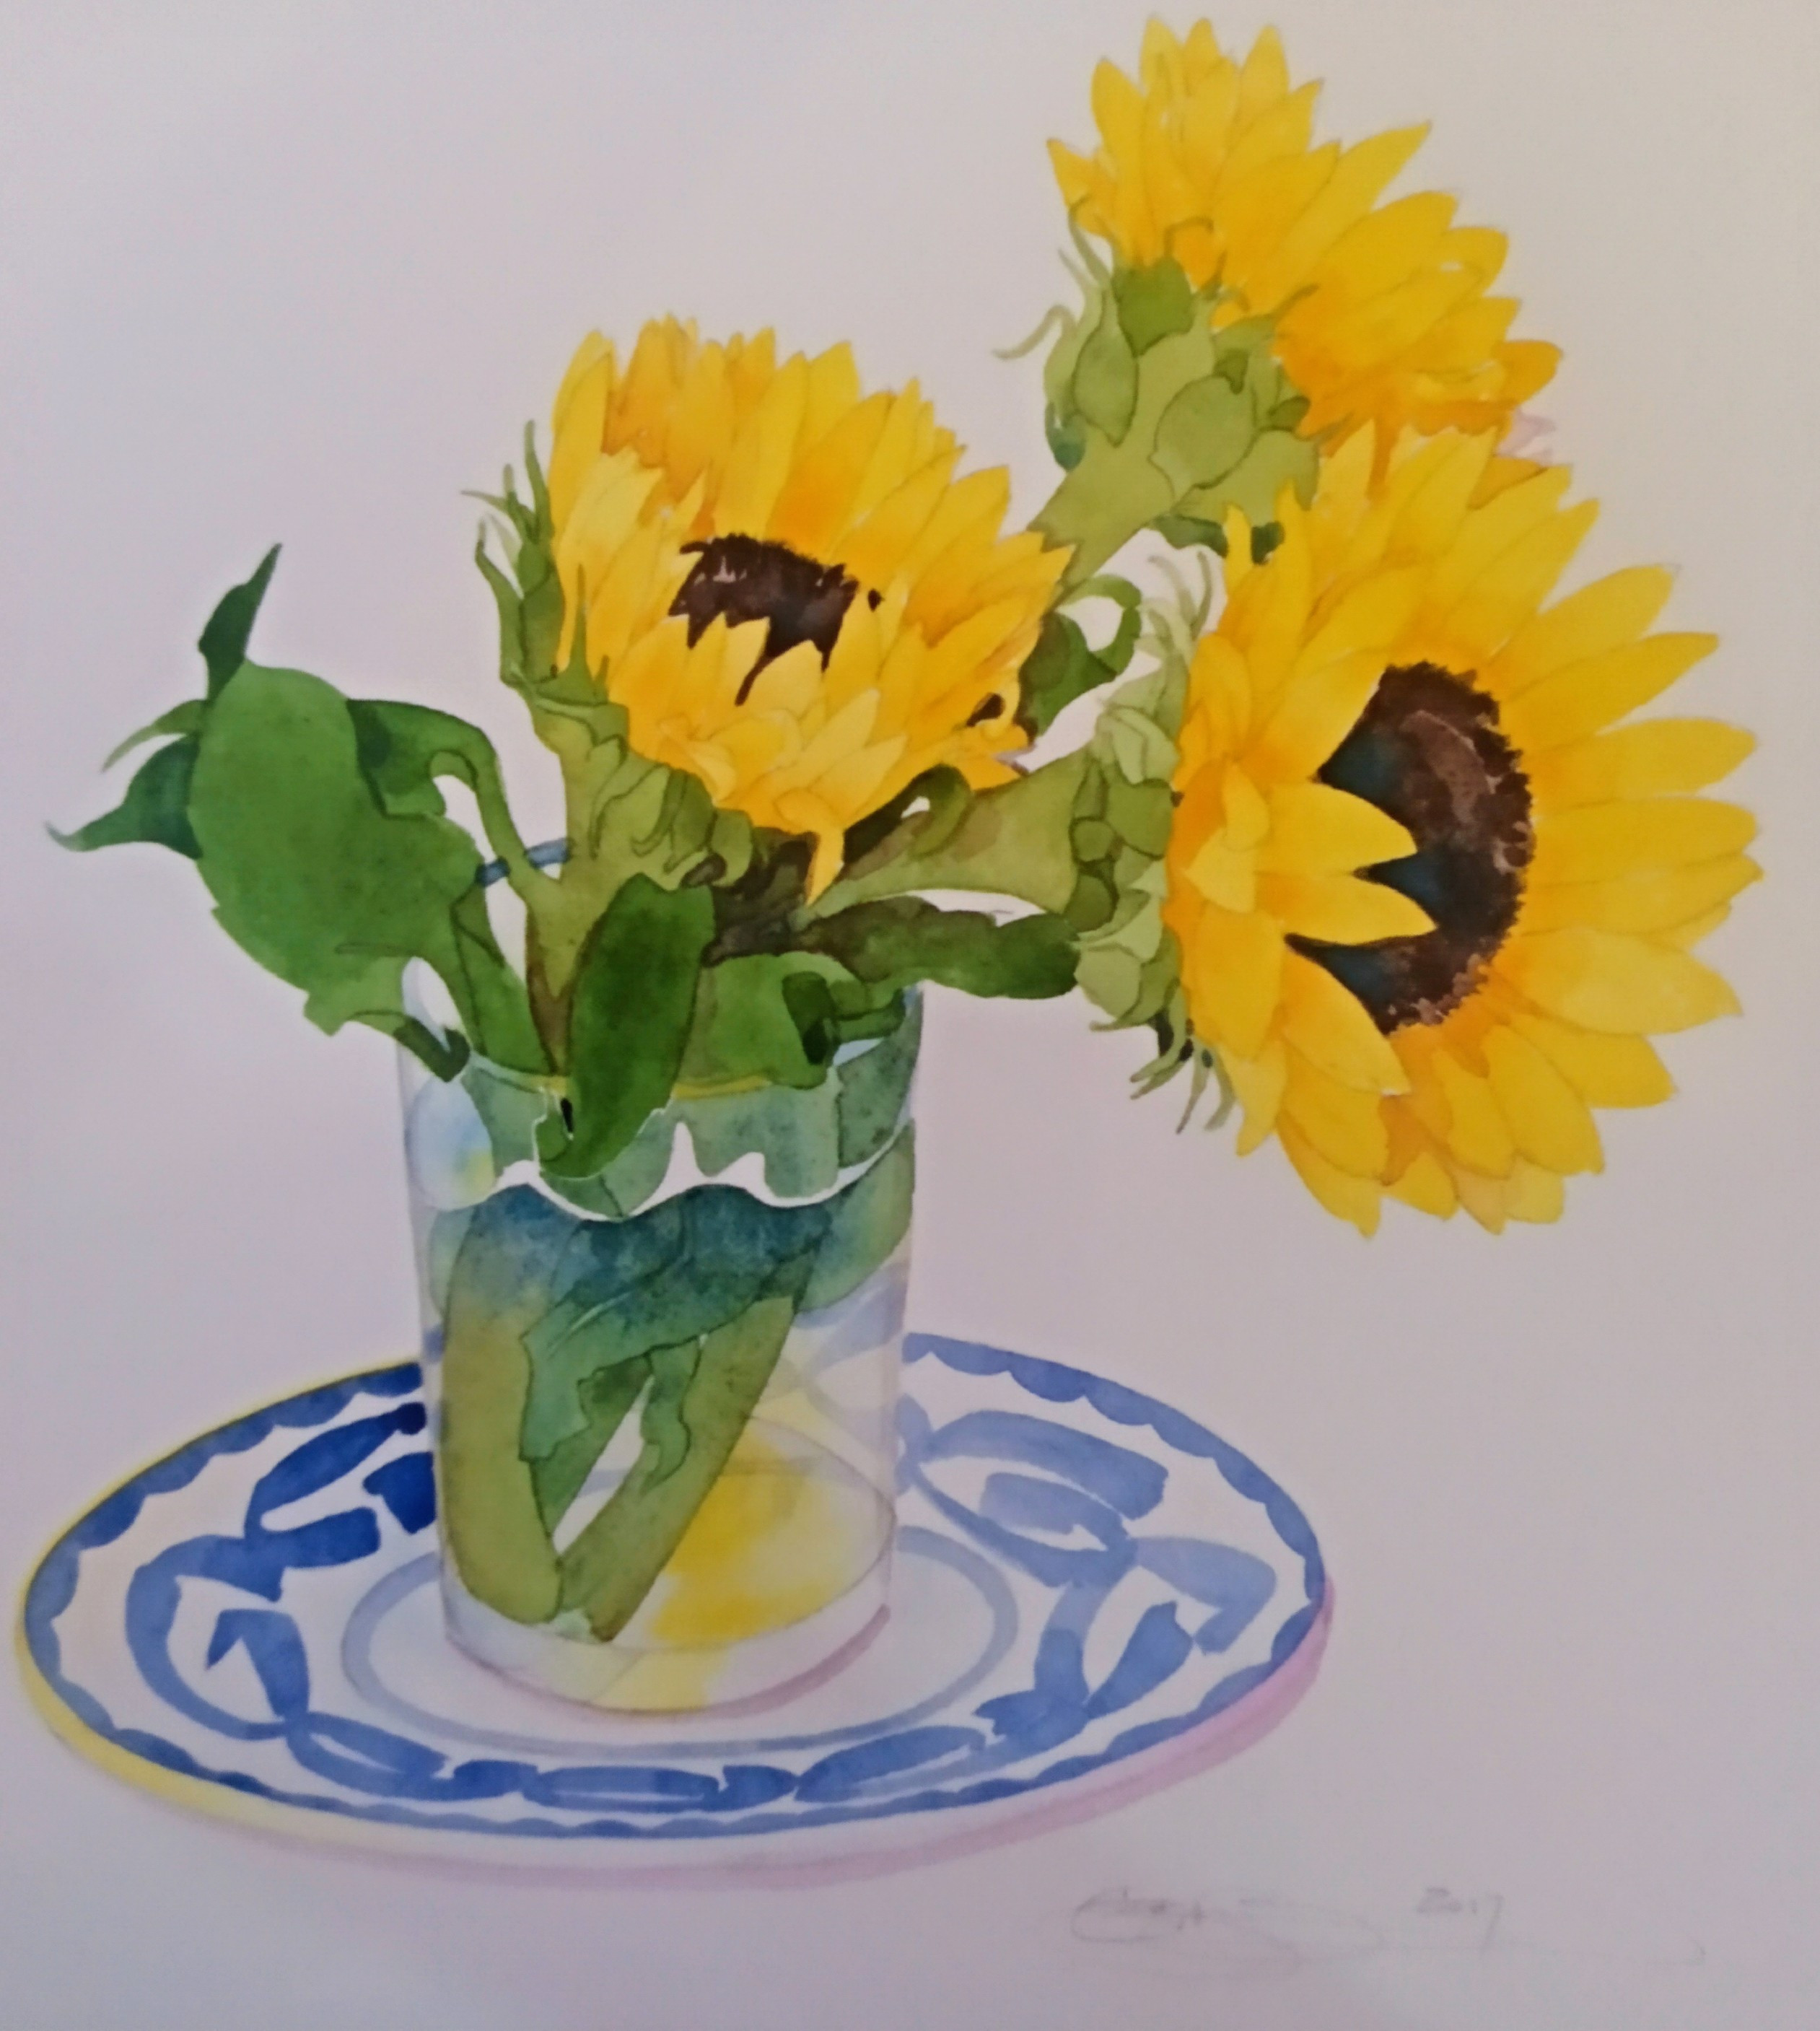 Small Sunflowers in a vase, 2018